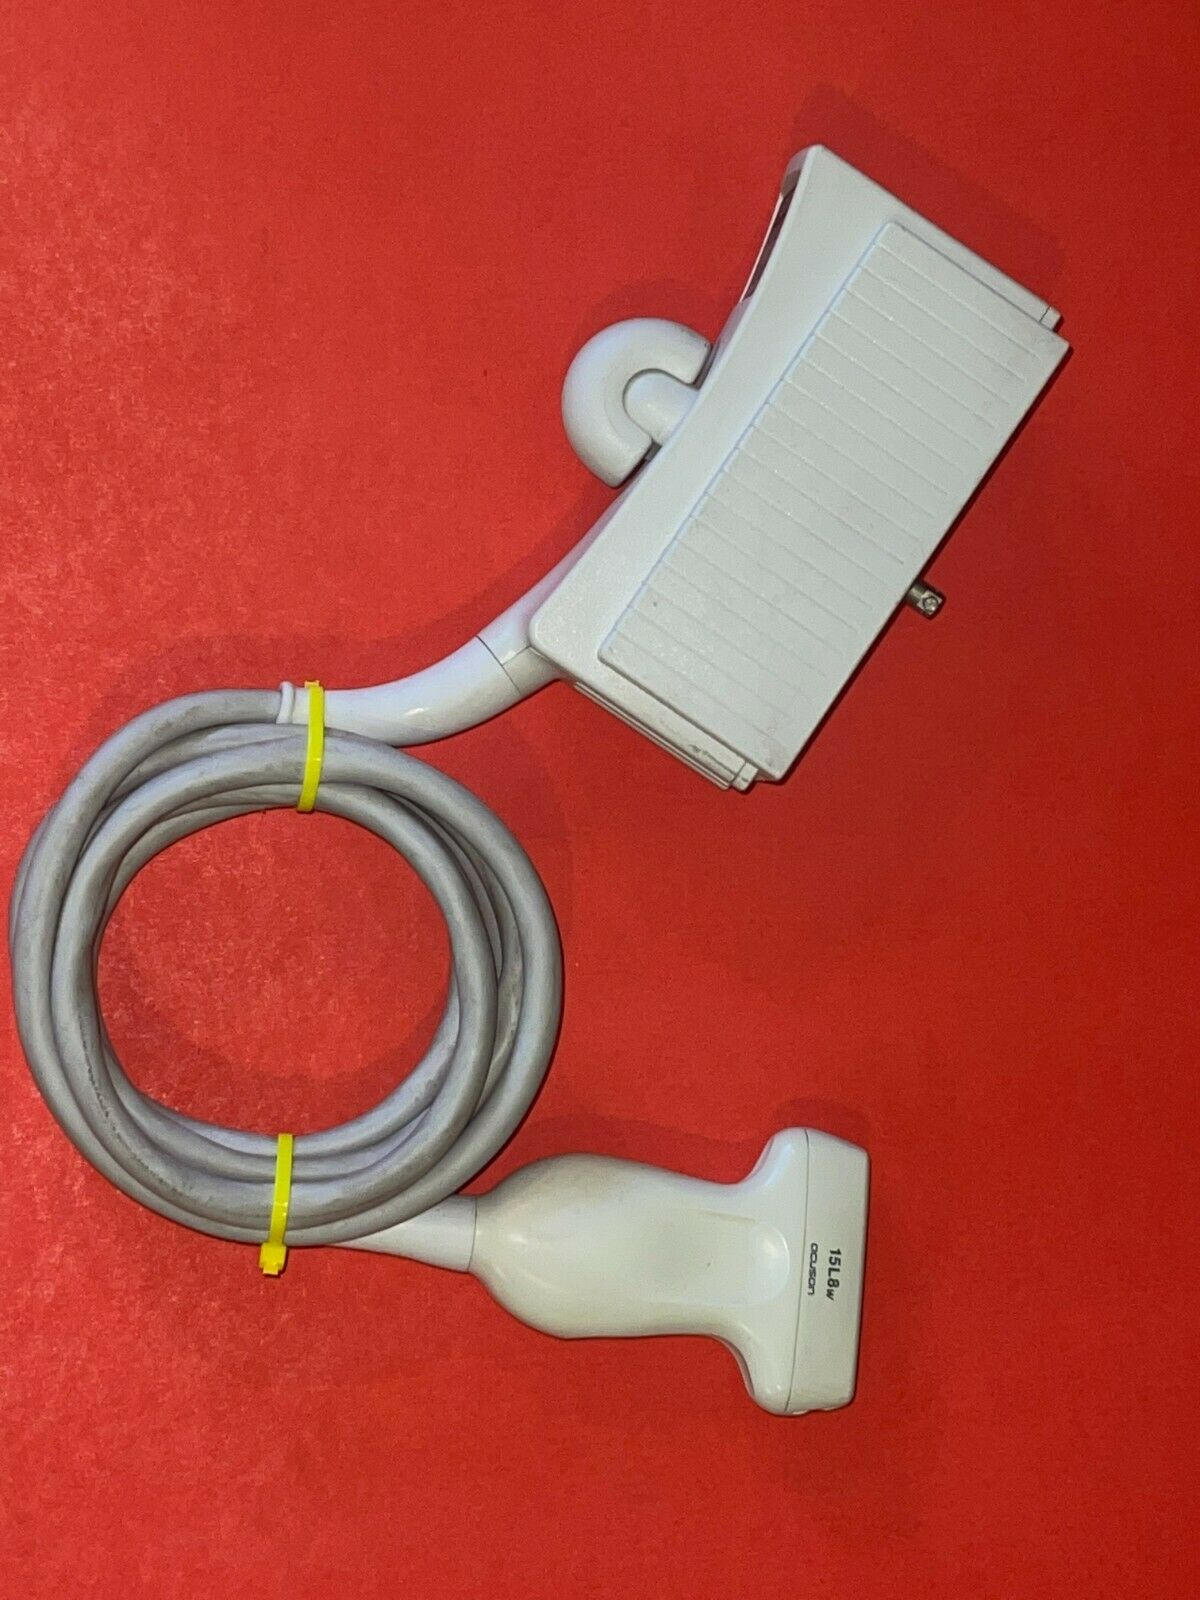 Siemens Acuson 15L8W Ultrasound Transducer Probe for Sequoia 512 System IPX0 DIAGNOSTIC ULTRASOUND MACHINES FOR SALE